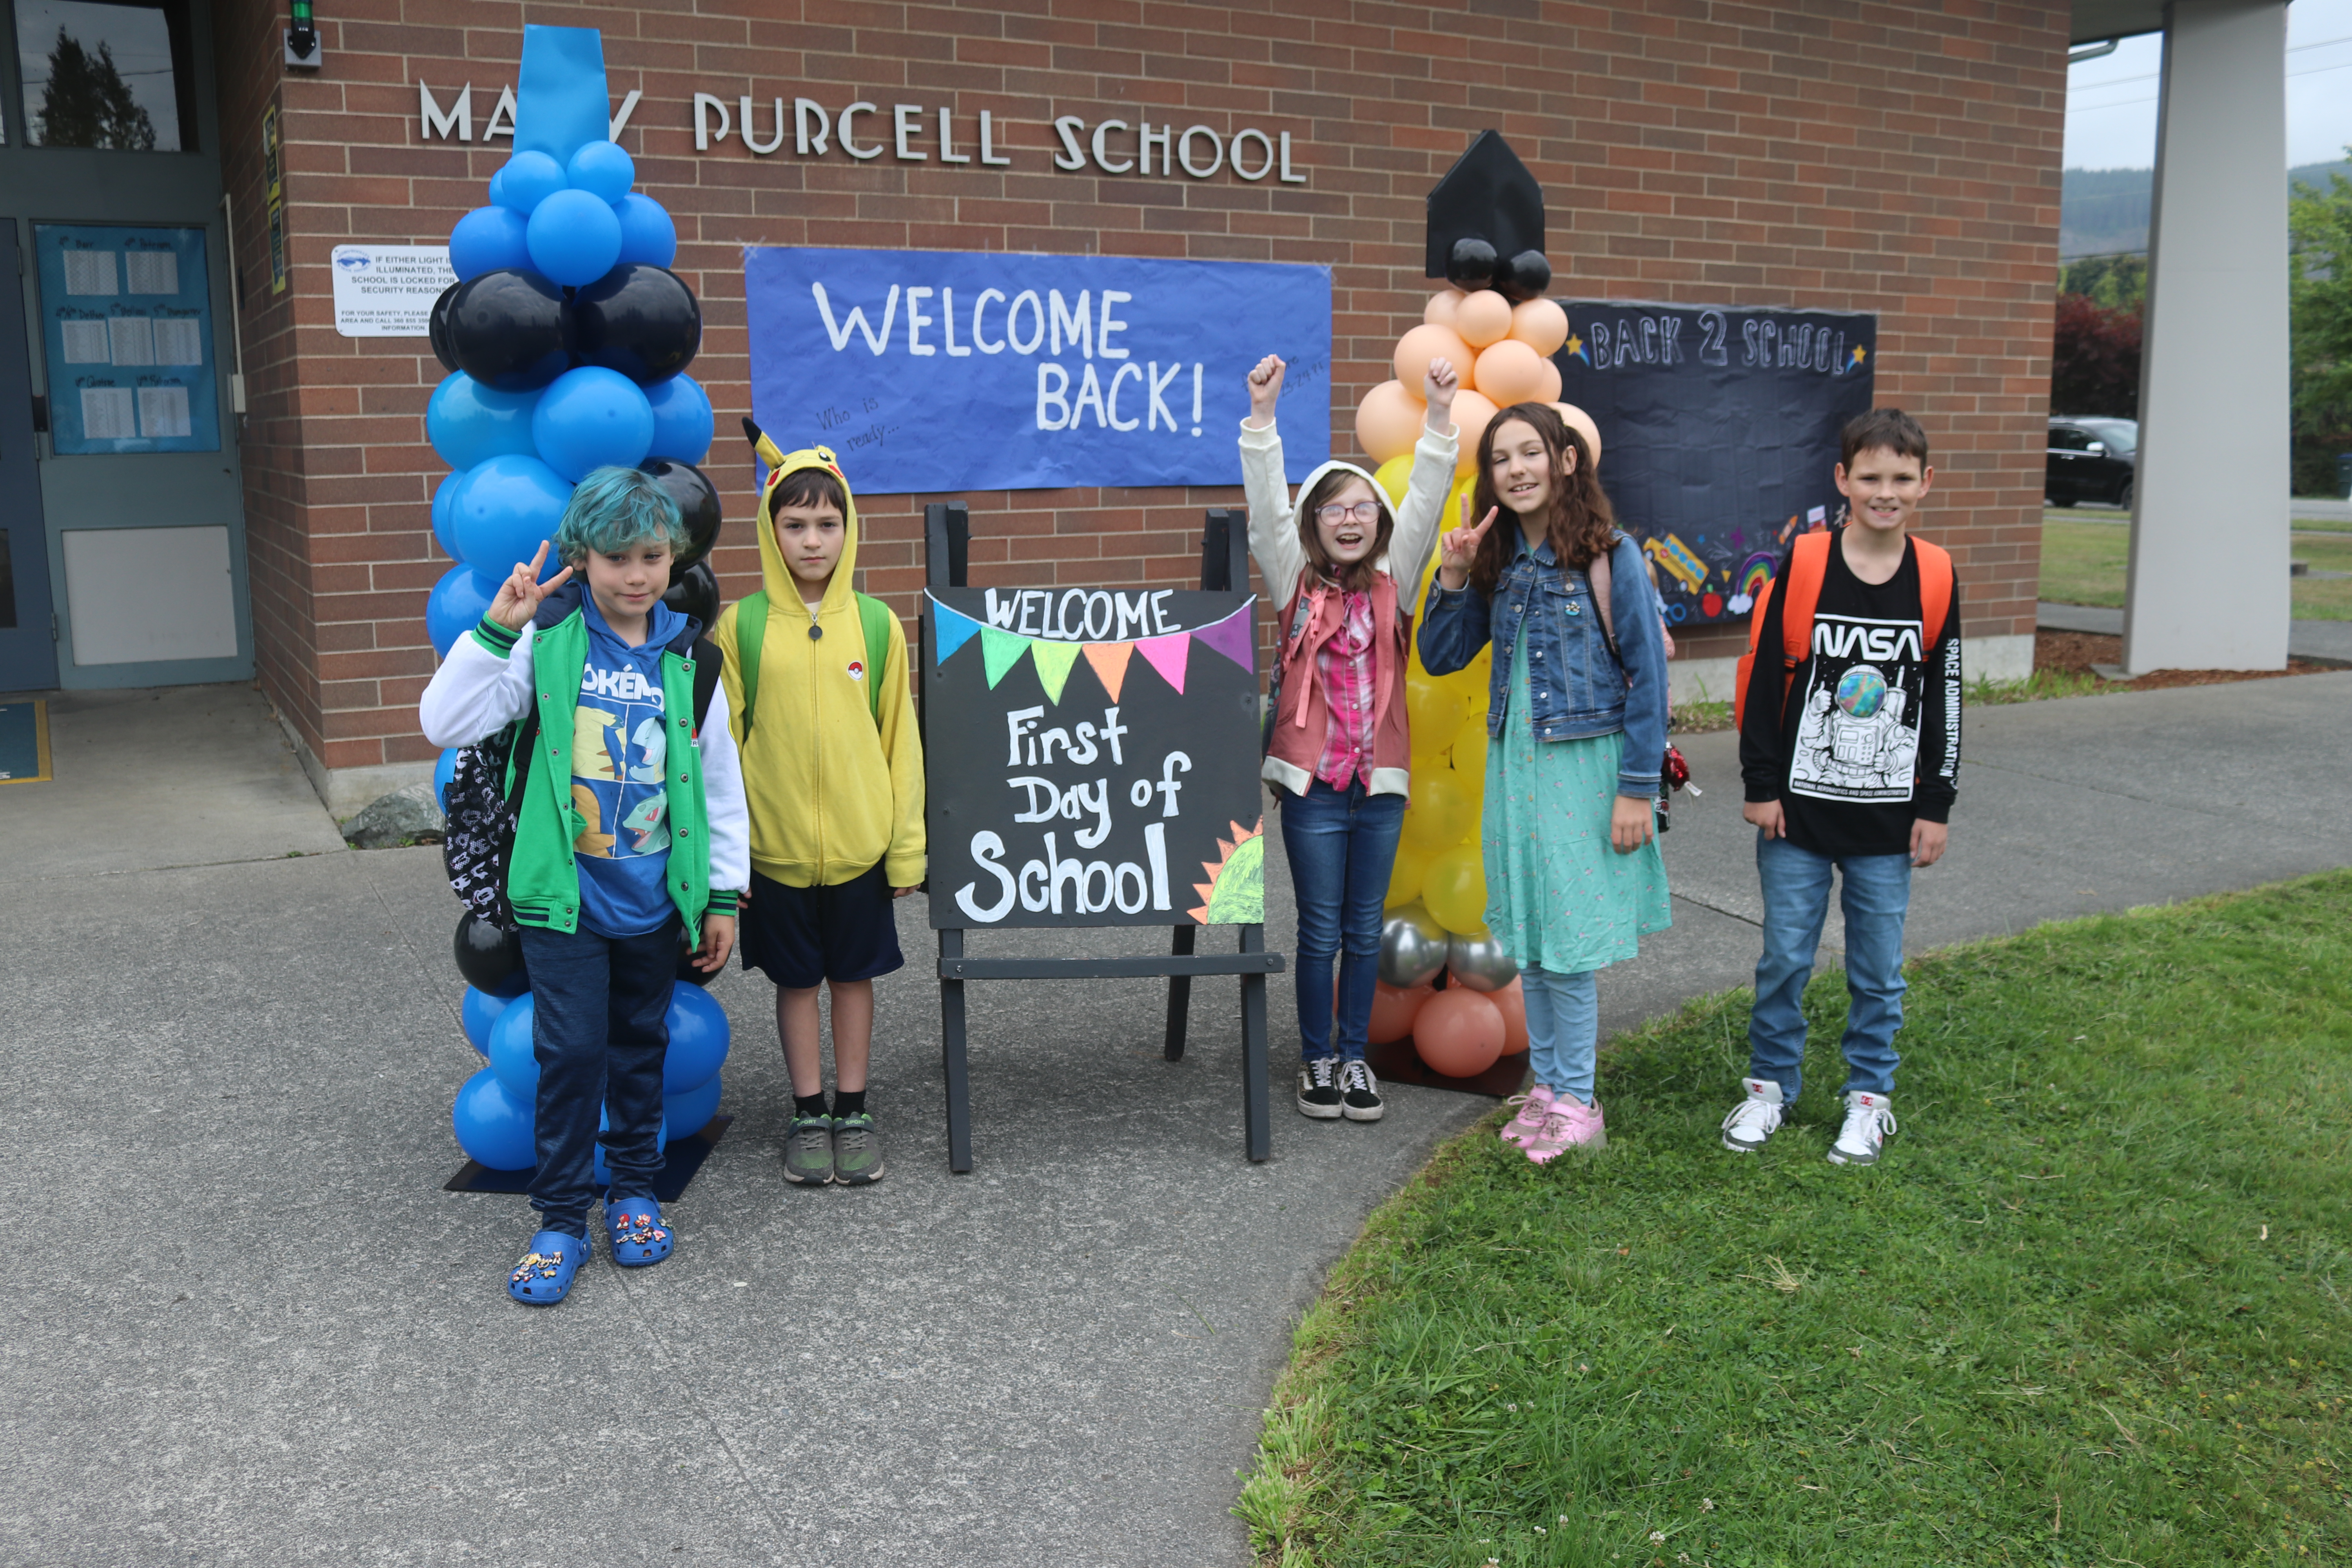 Mary Purcell Elementary students celebrate the first day of school!